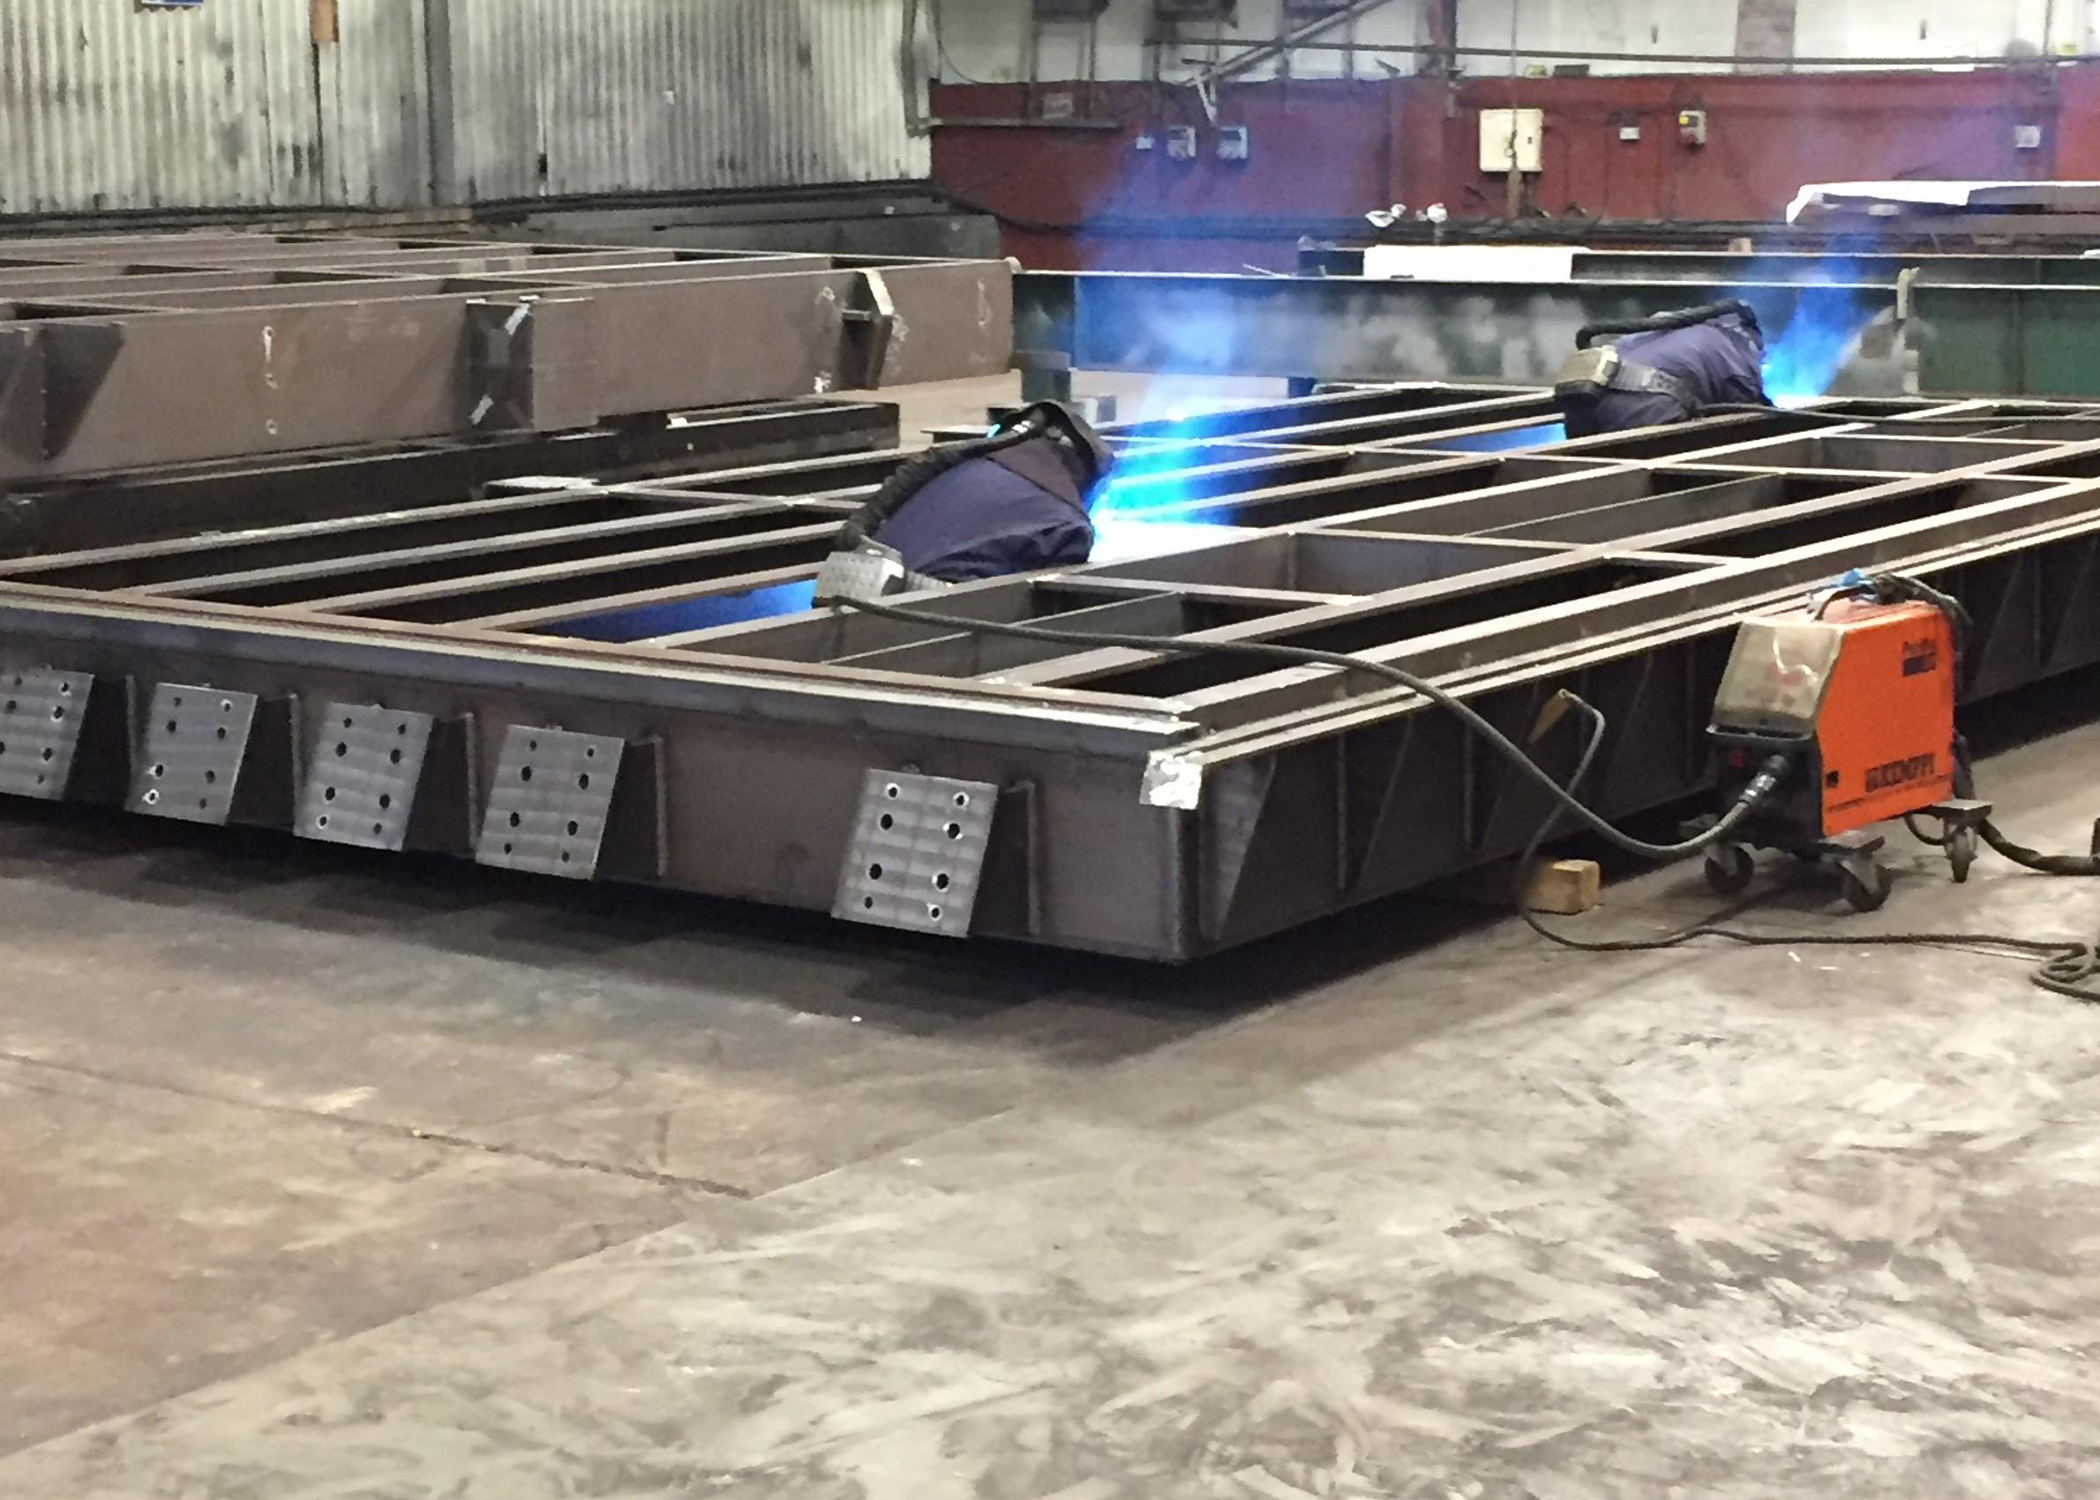 Fabrication work was conducted entirely in-house, allowing each completed gate to be transported to Fort Augustus completed for prompt installation.